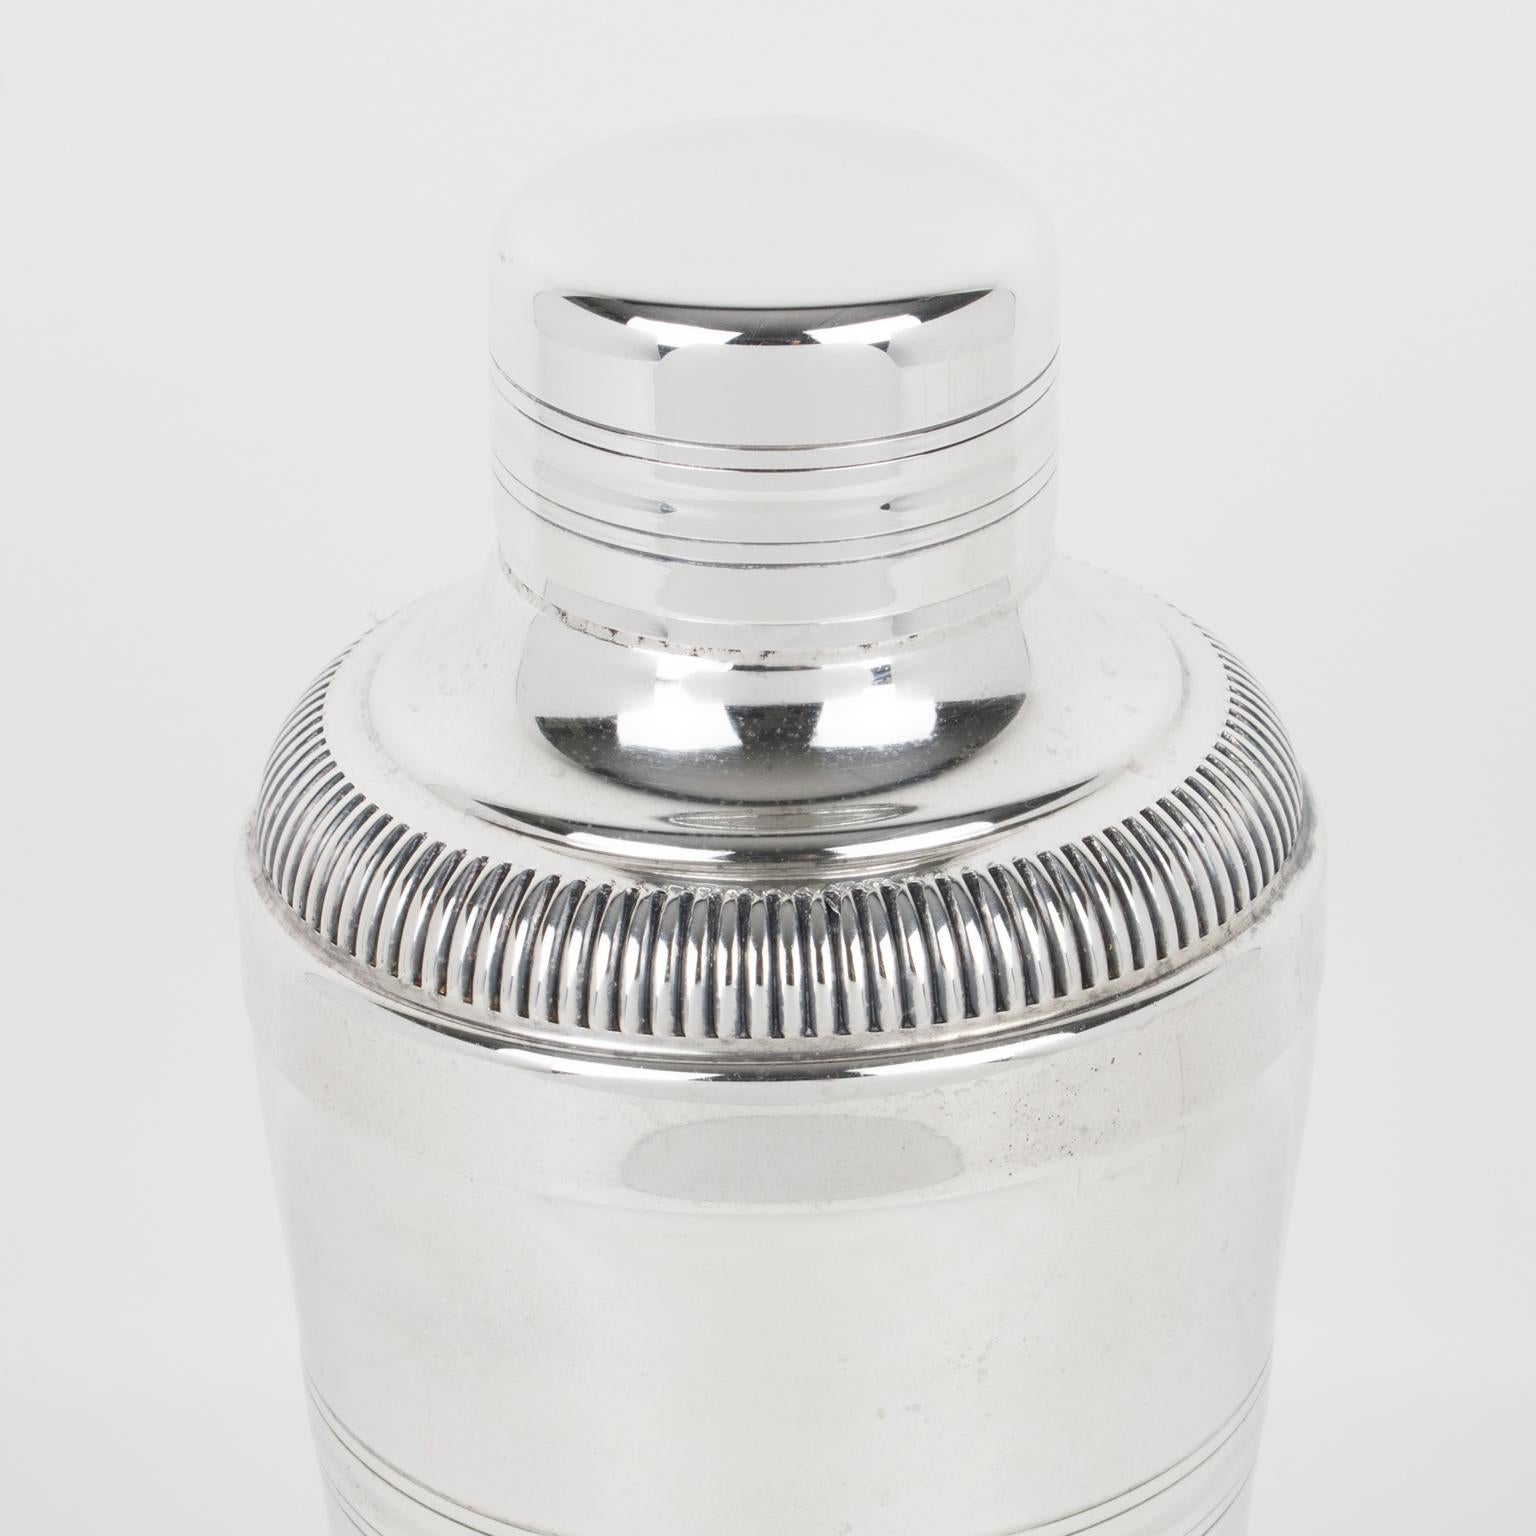 Mid-20th Century Art Deco Silver Plate Cocktail Shaker by Gelb, Paris 1940s For Sale